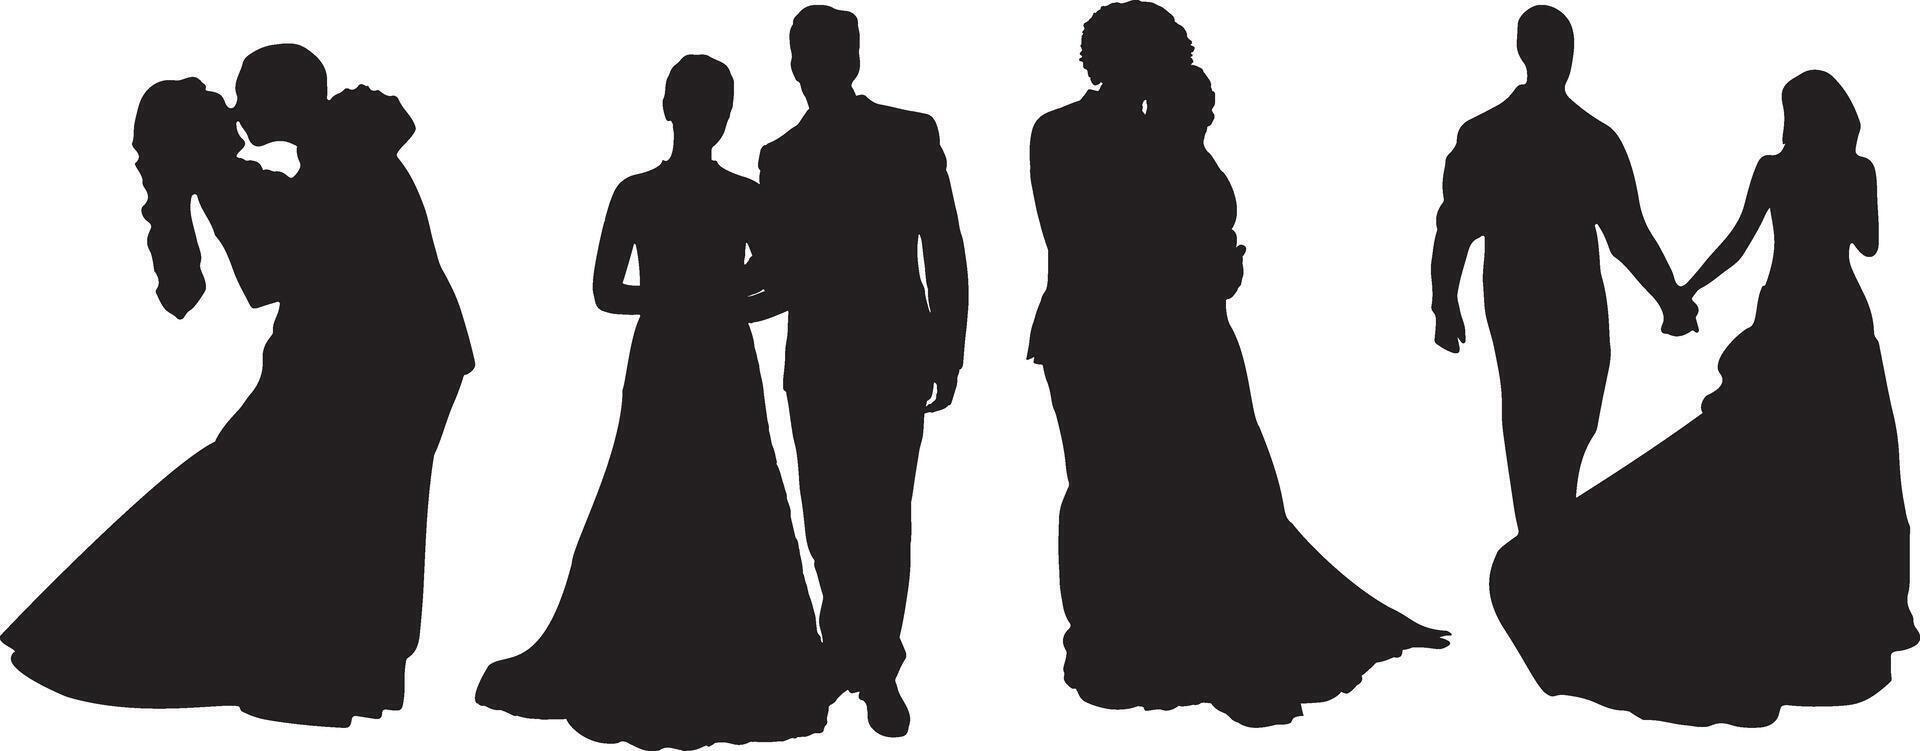 Bride and groom silhouette on white background vector